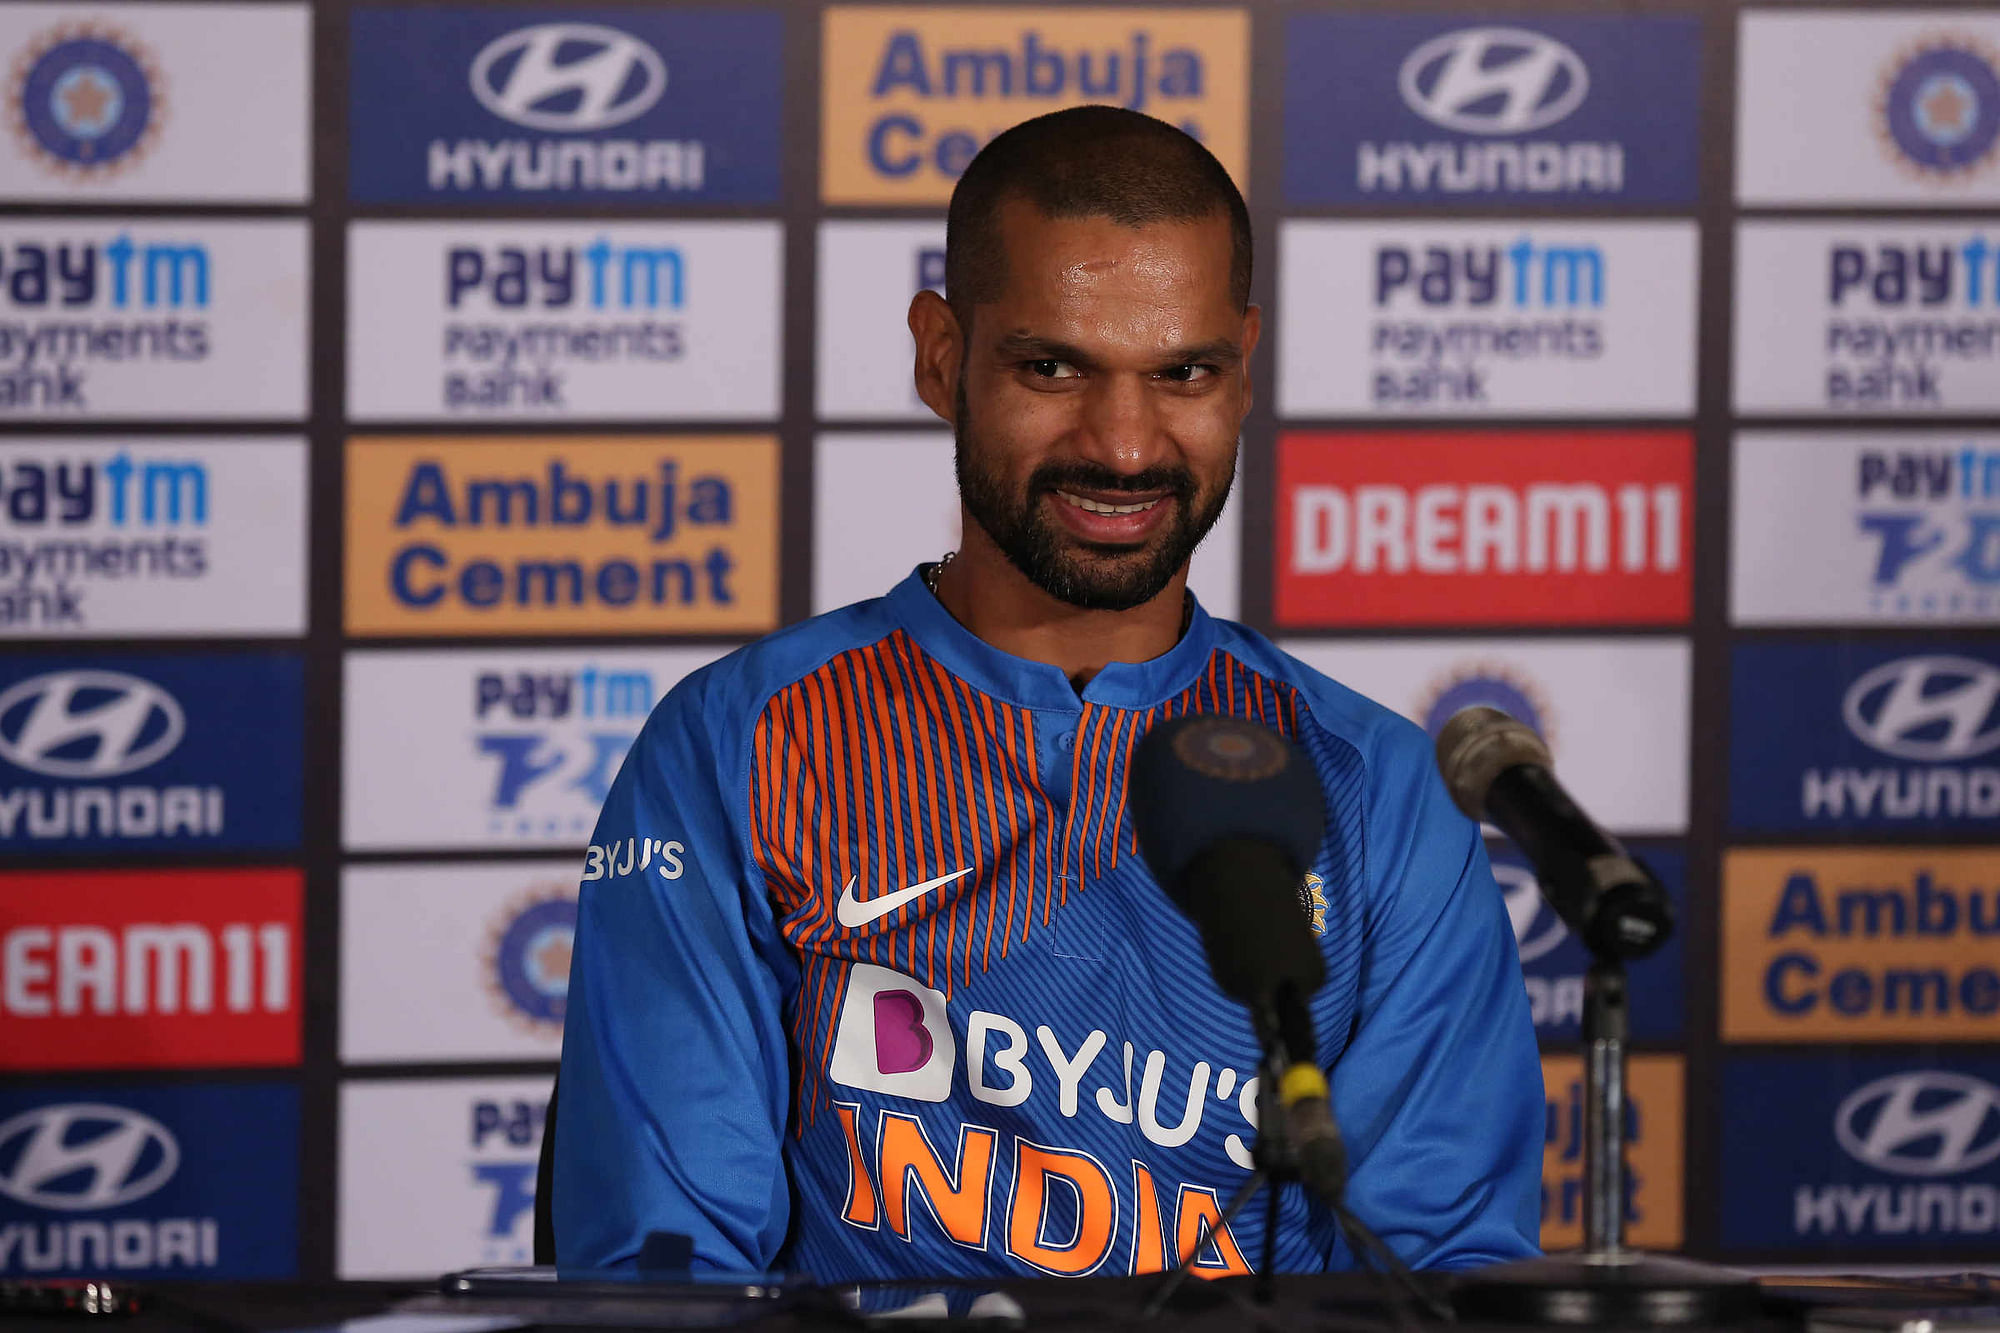 Shikhar Dhawan scored 52 off 36 balls as India beat Sri Lanka by 78 runs to win the third T20I in Pune on Friday.